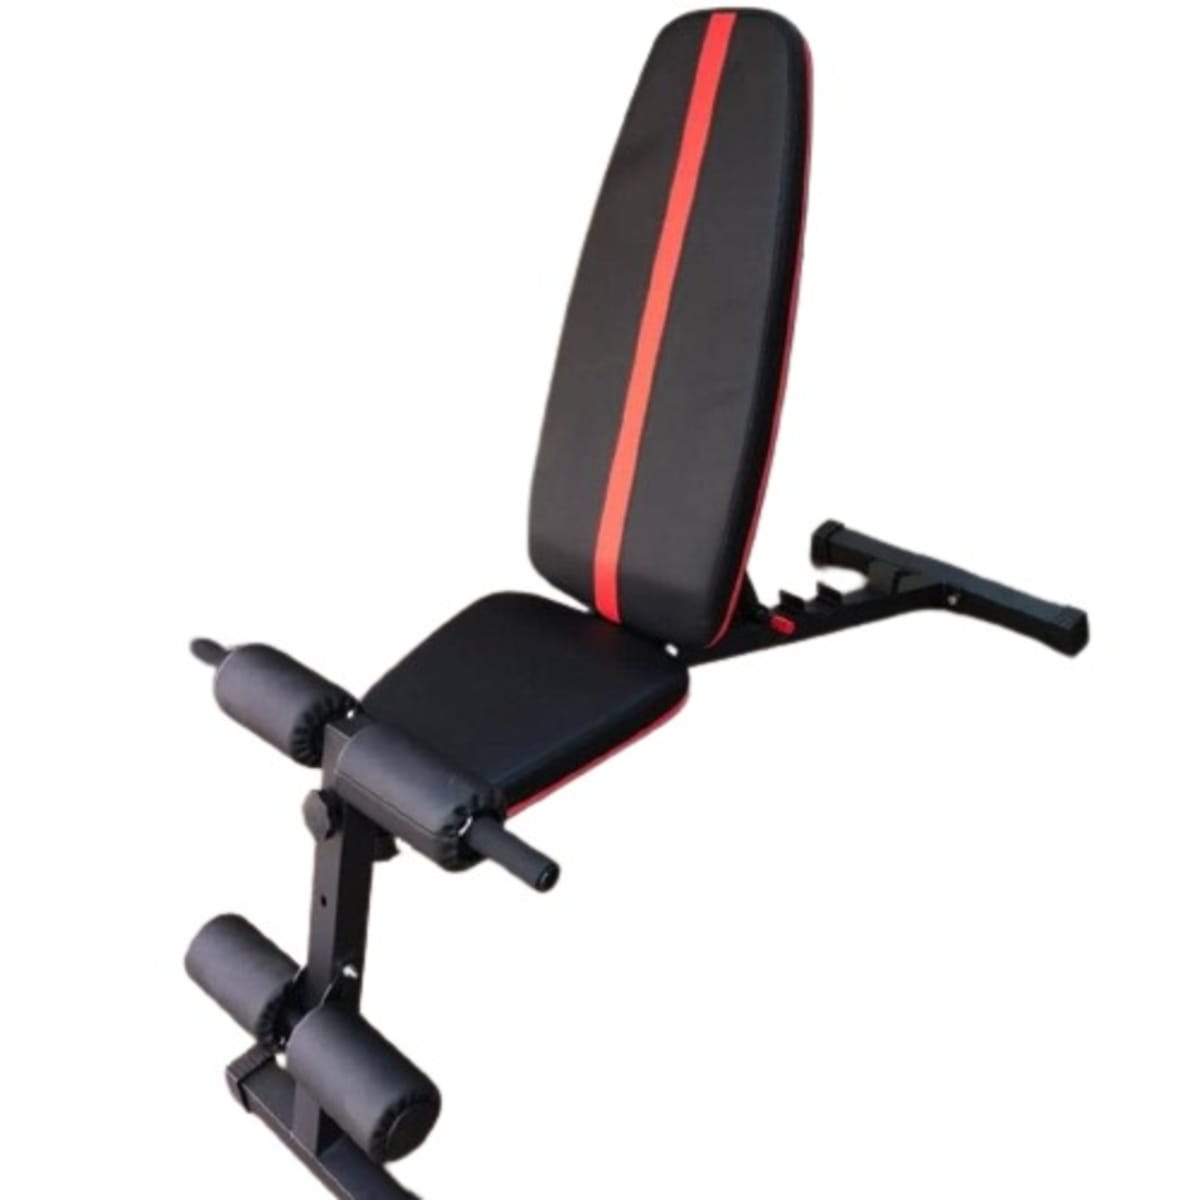 Adjustable Utility Bench - Order Online Today